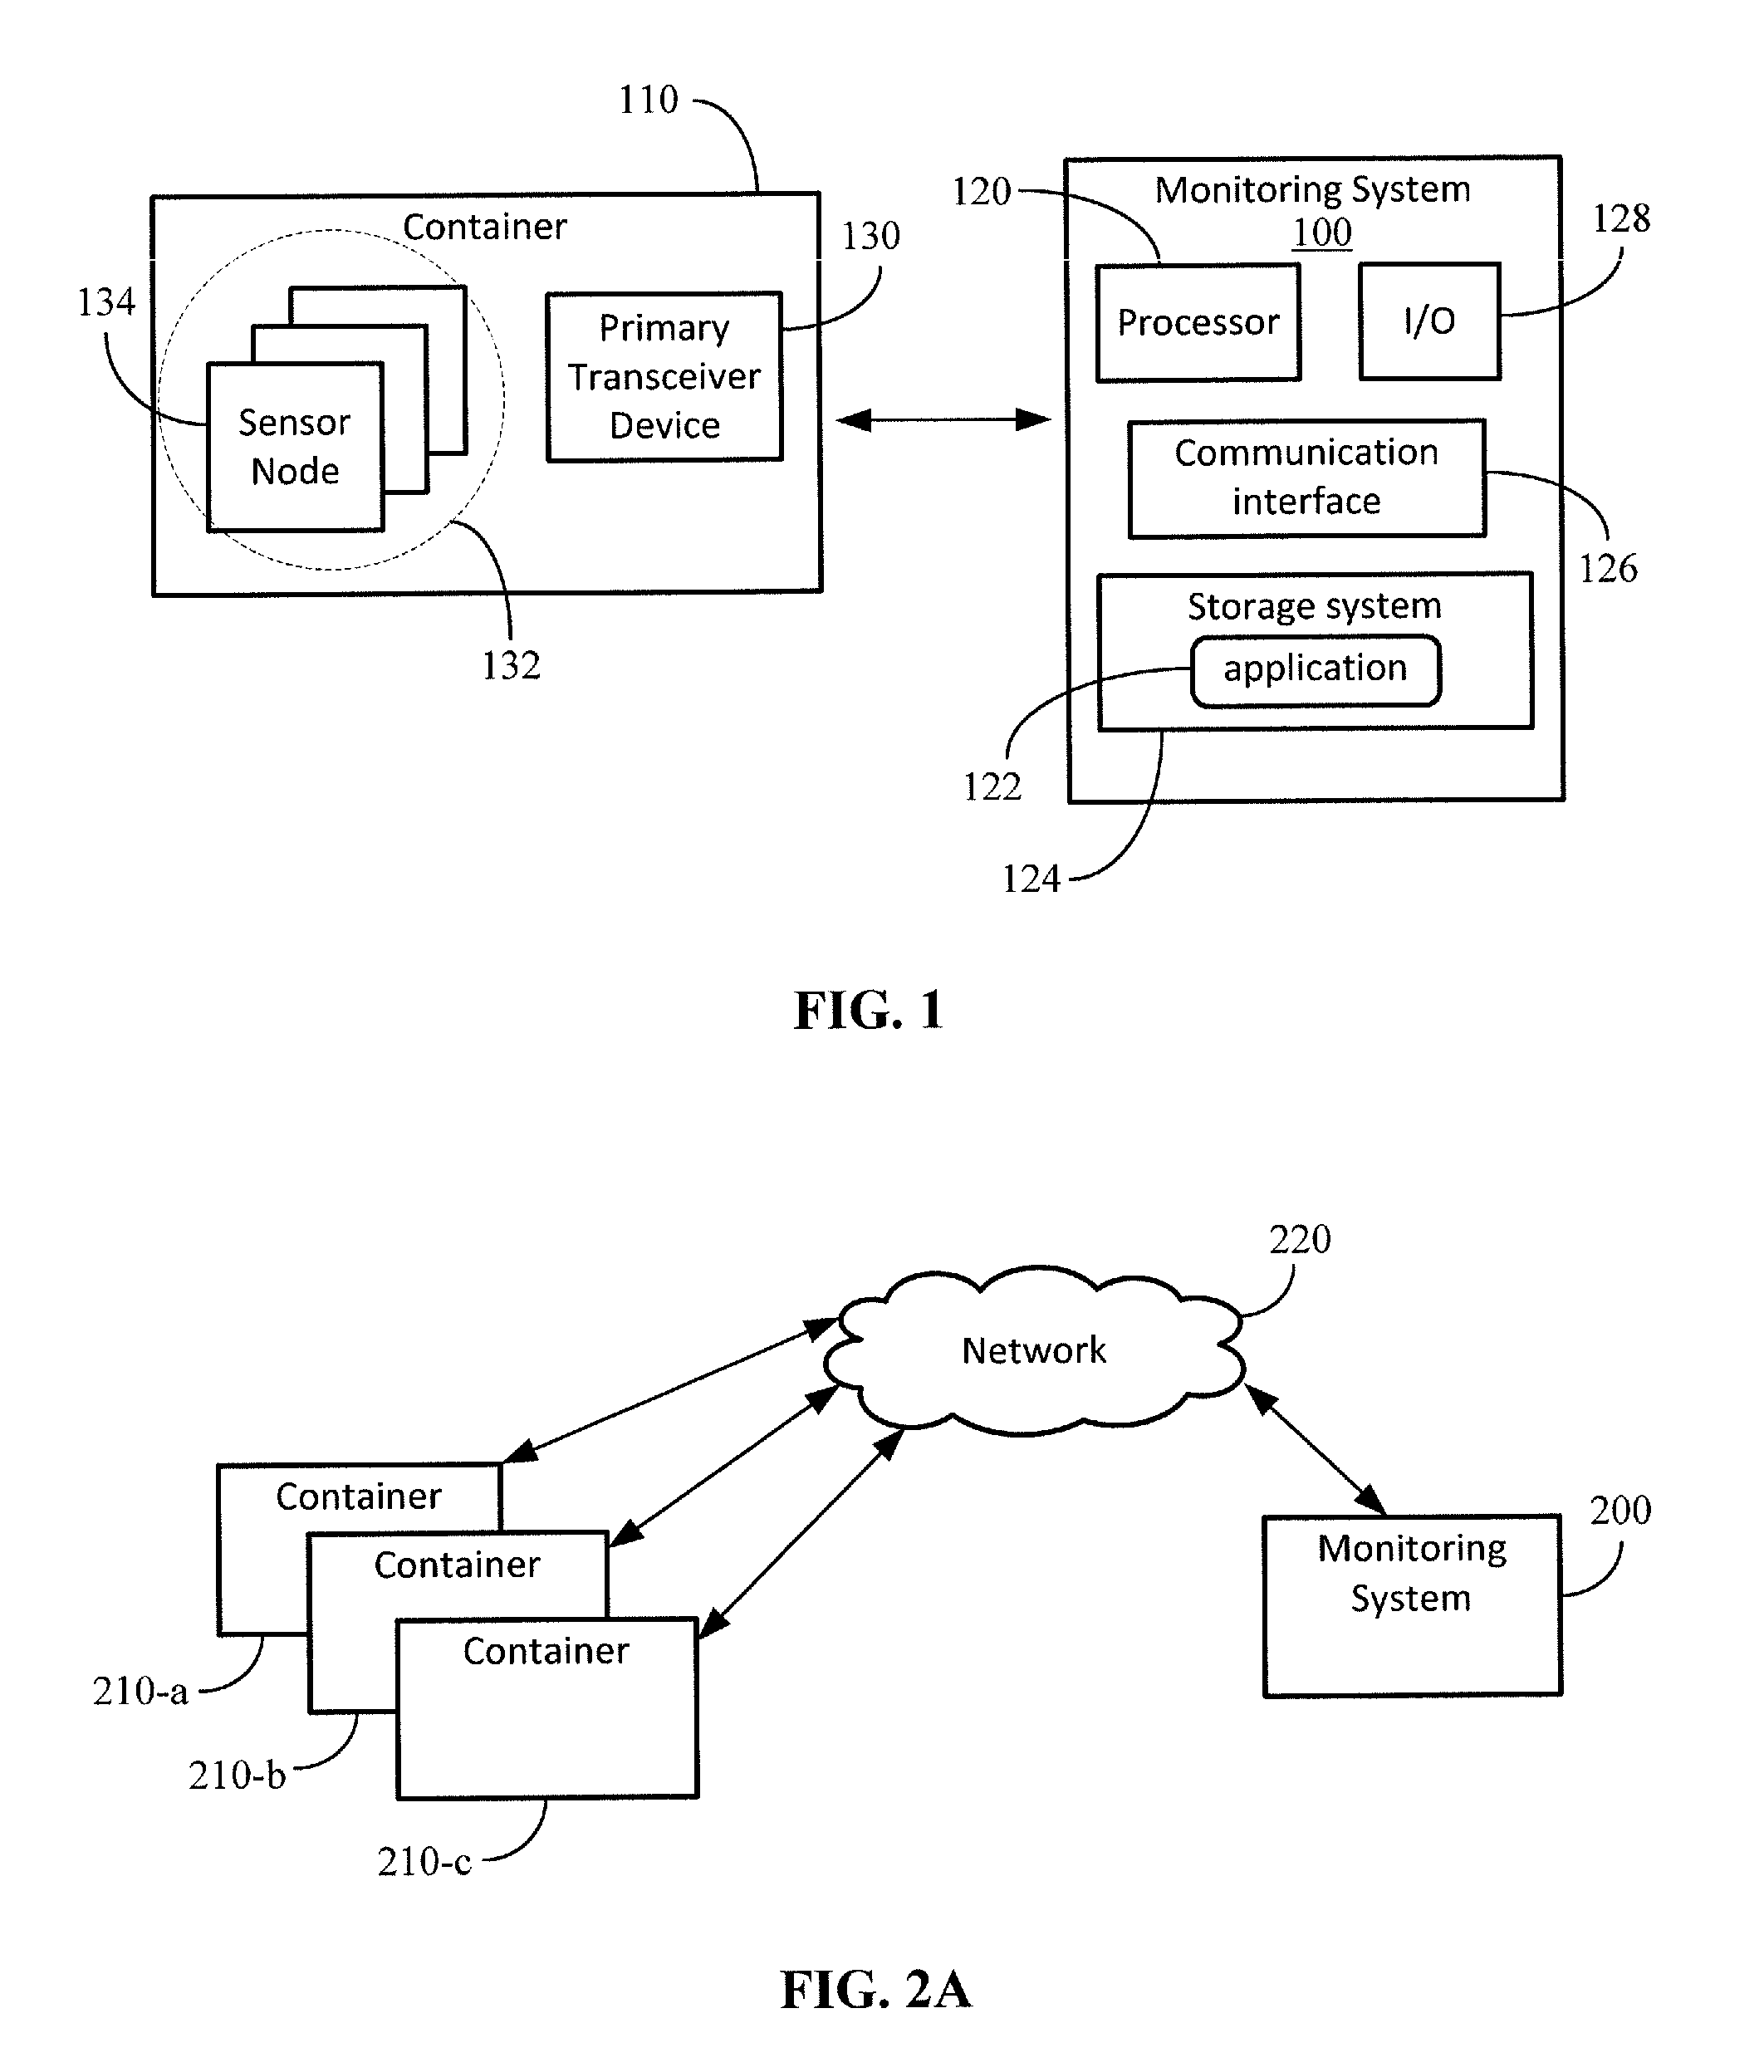 Monitoring system for perishable or temperature-sensitive product transportation and storage